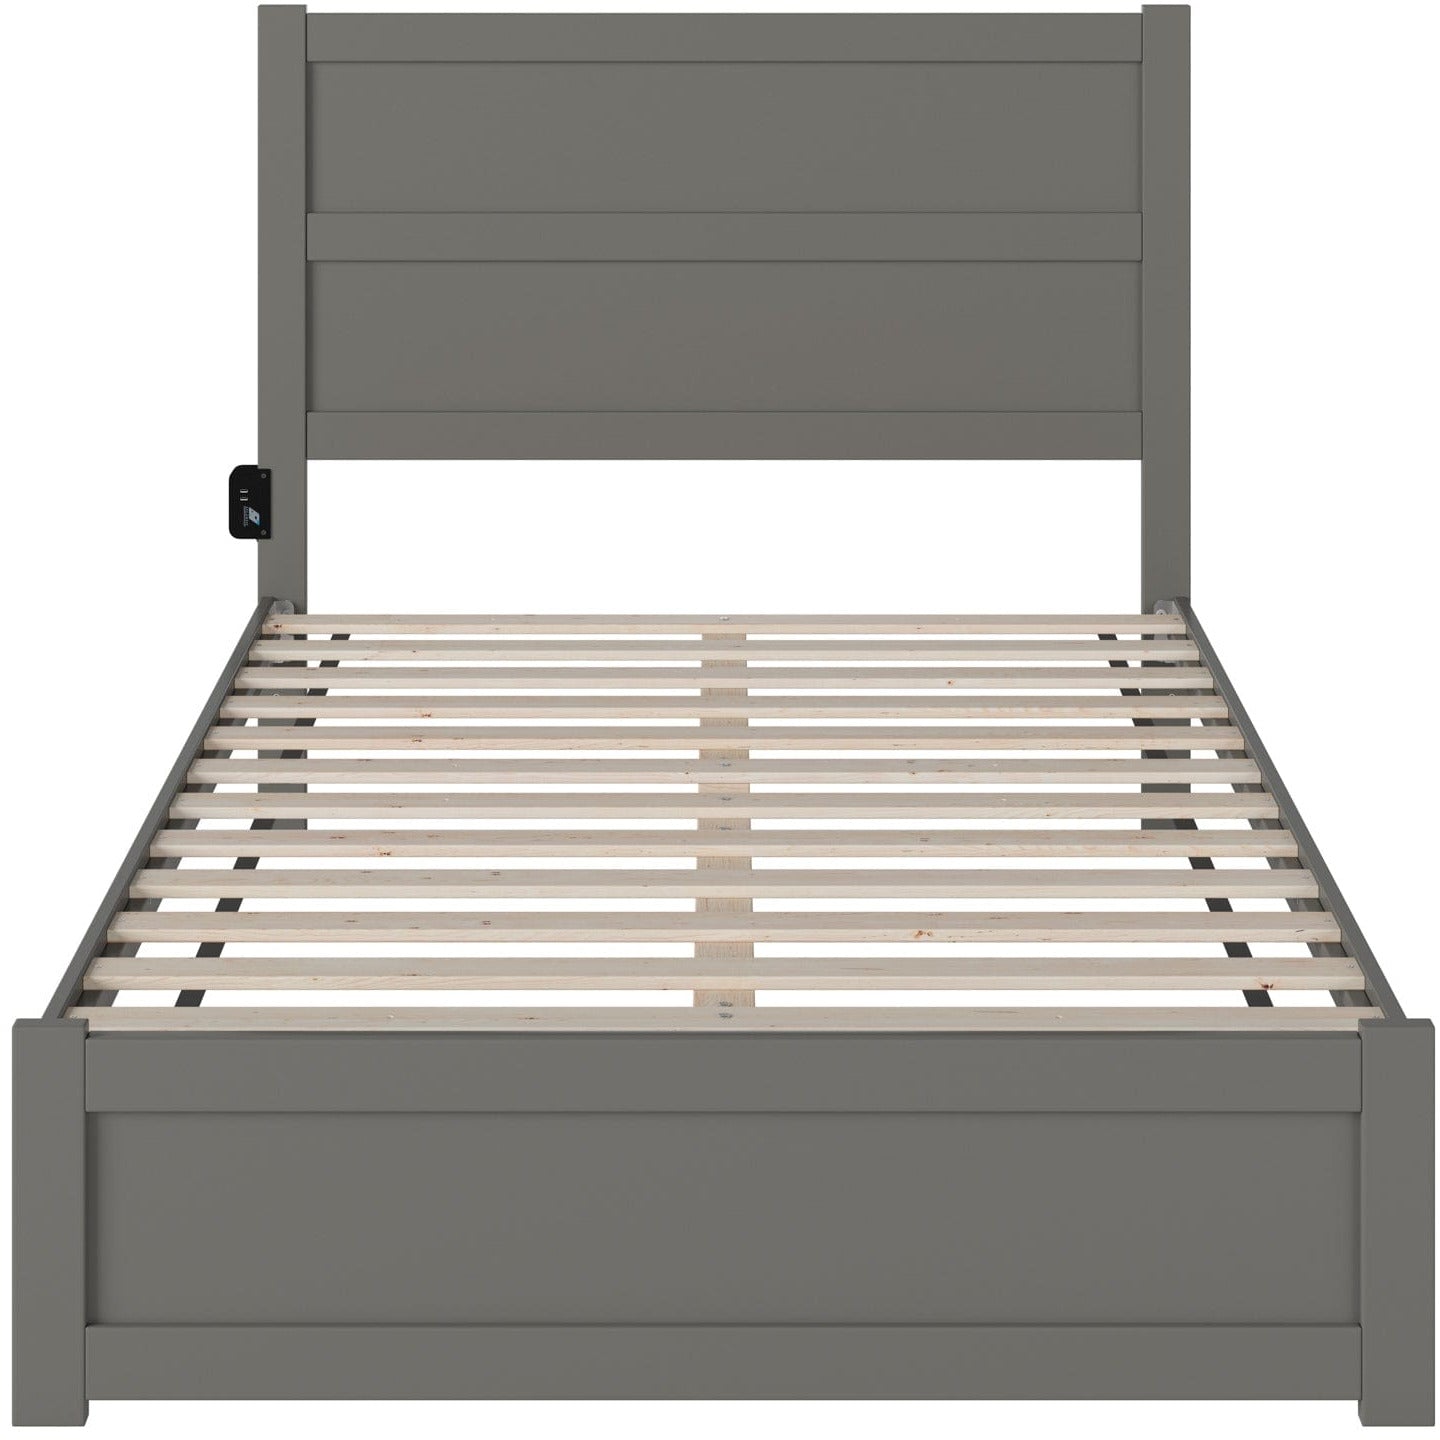 AFI Furnishings NoHo Full Bed with Footboard in Grey AG9160039